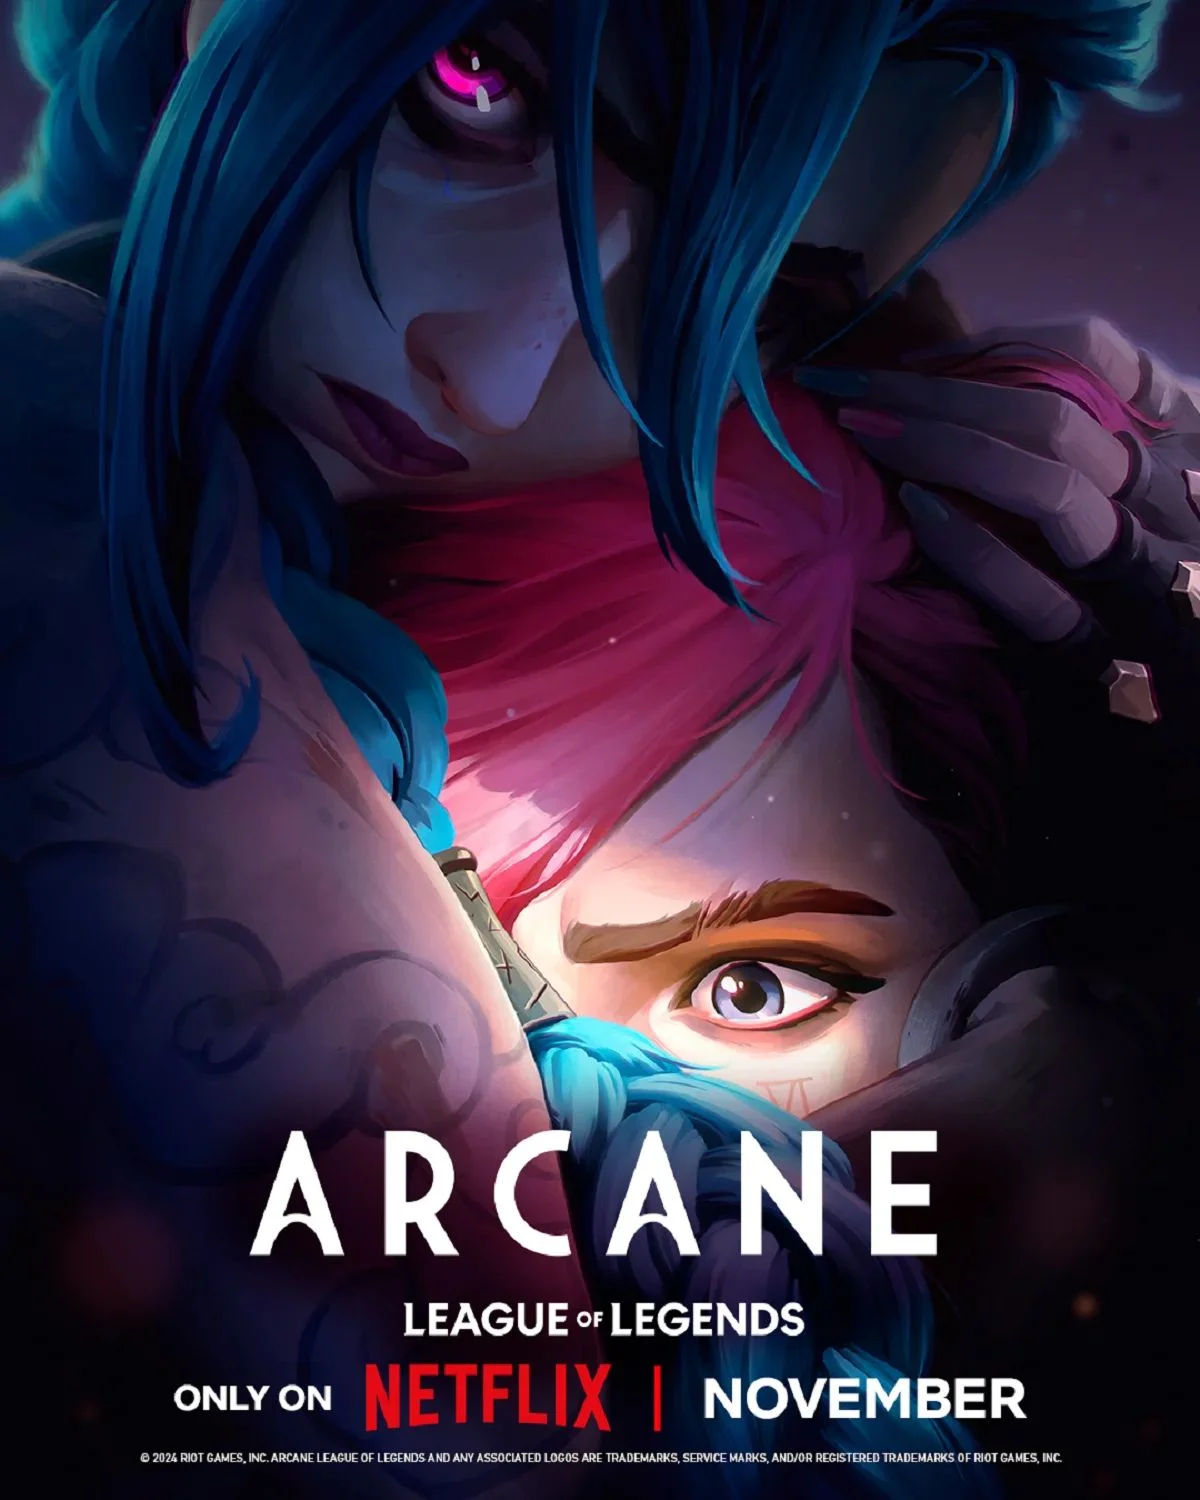 The first poster has been released for the 2nd season of the animated series Arcane - a show based on League of Legends